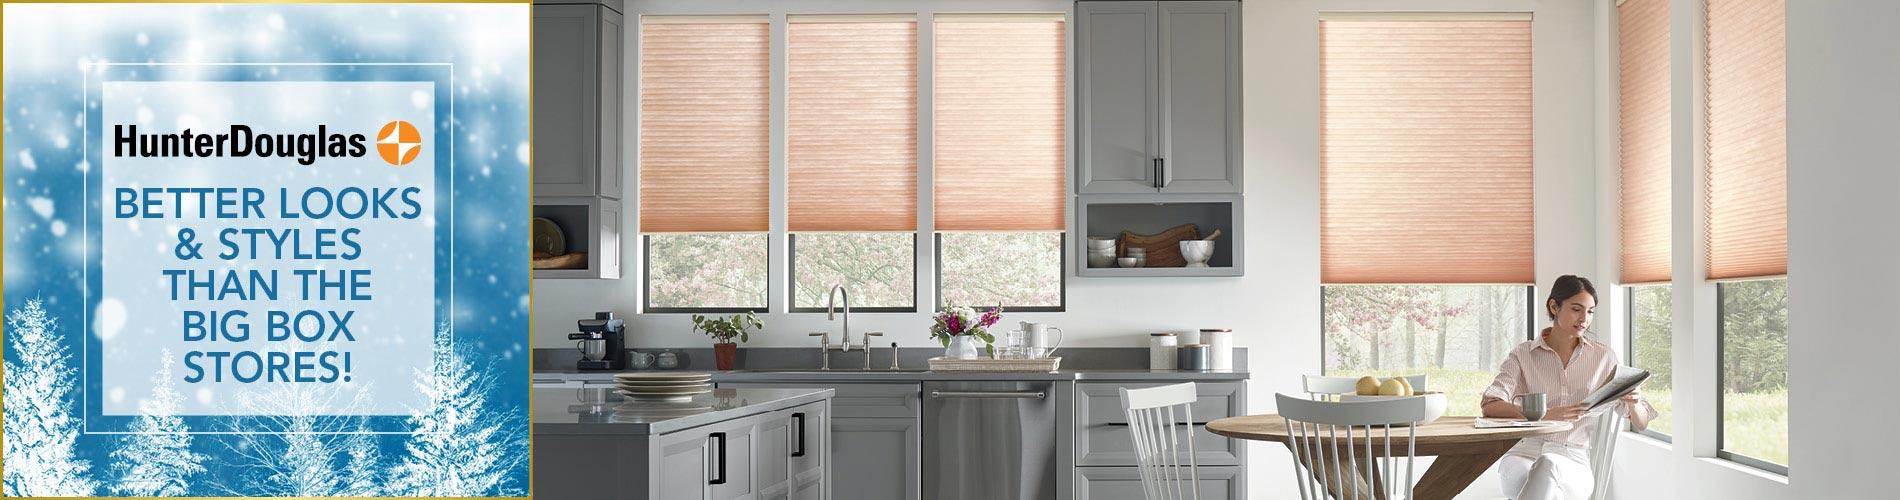 Hunter Douglas - Better looks and styles than the big box stores!